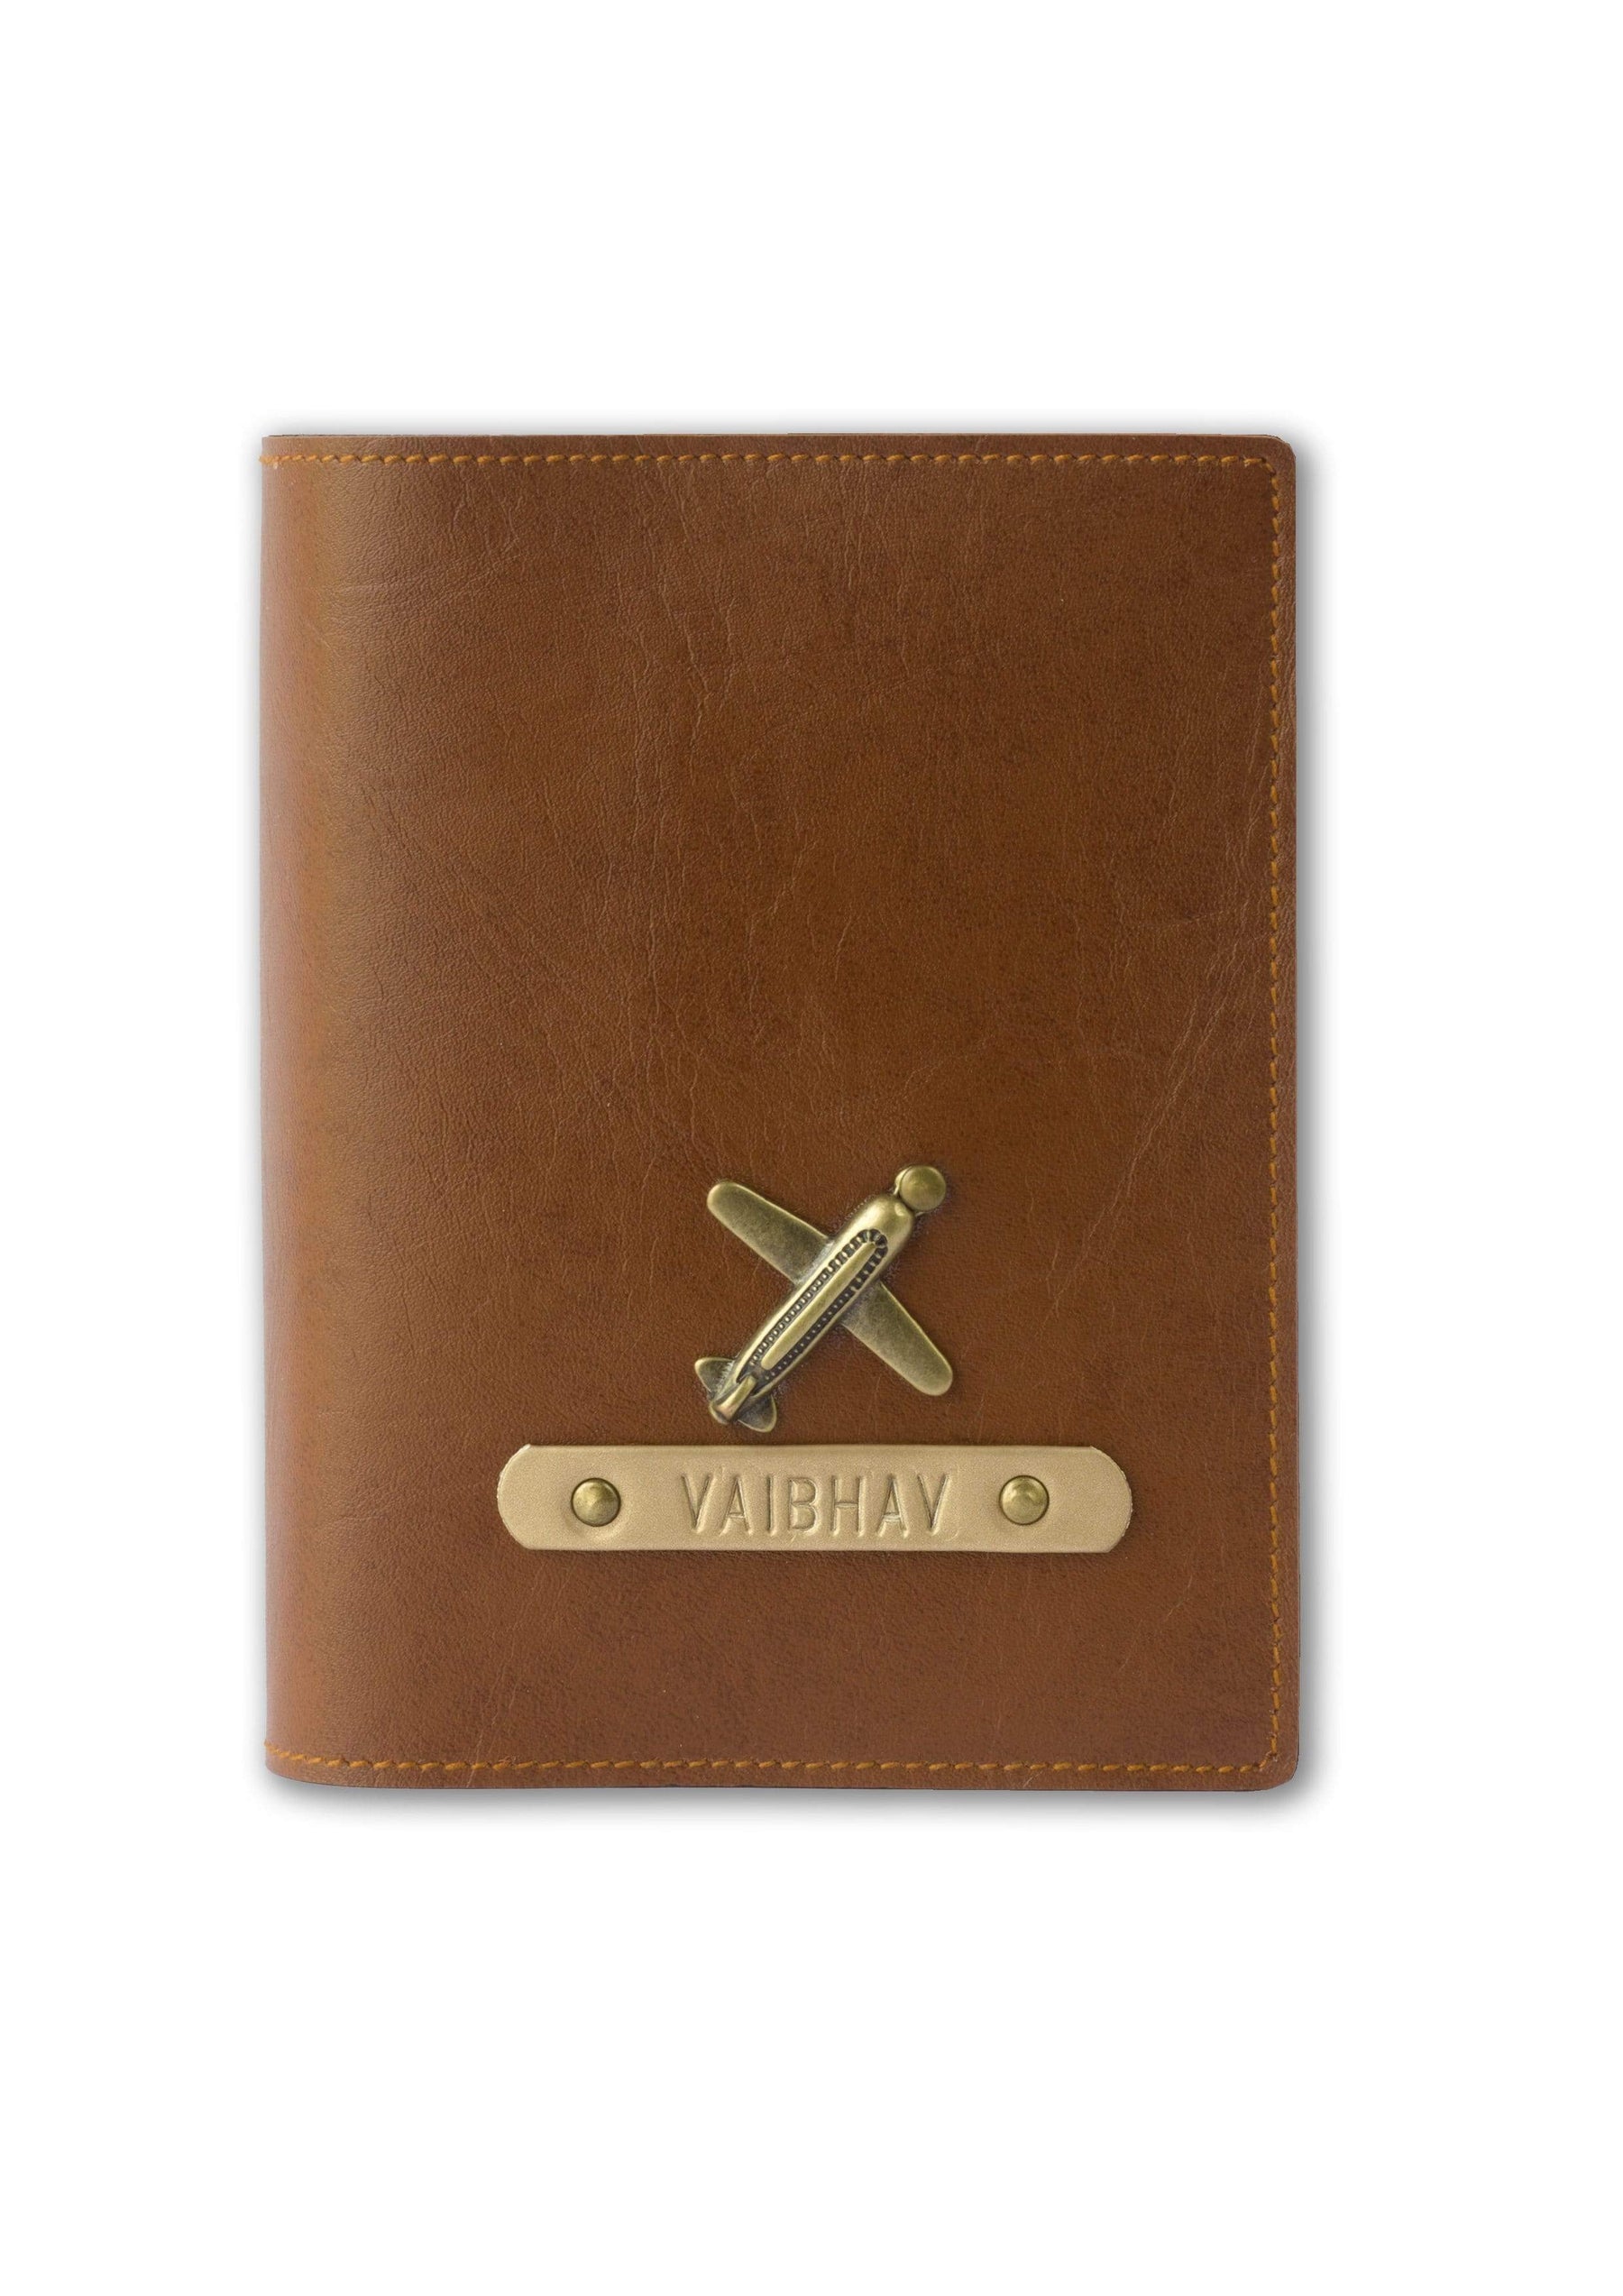 The Messy Corner OPTIONS_HIDDEN_PRODUCT Passport Cover - Color Selected